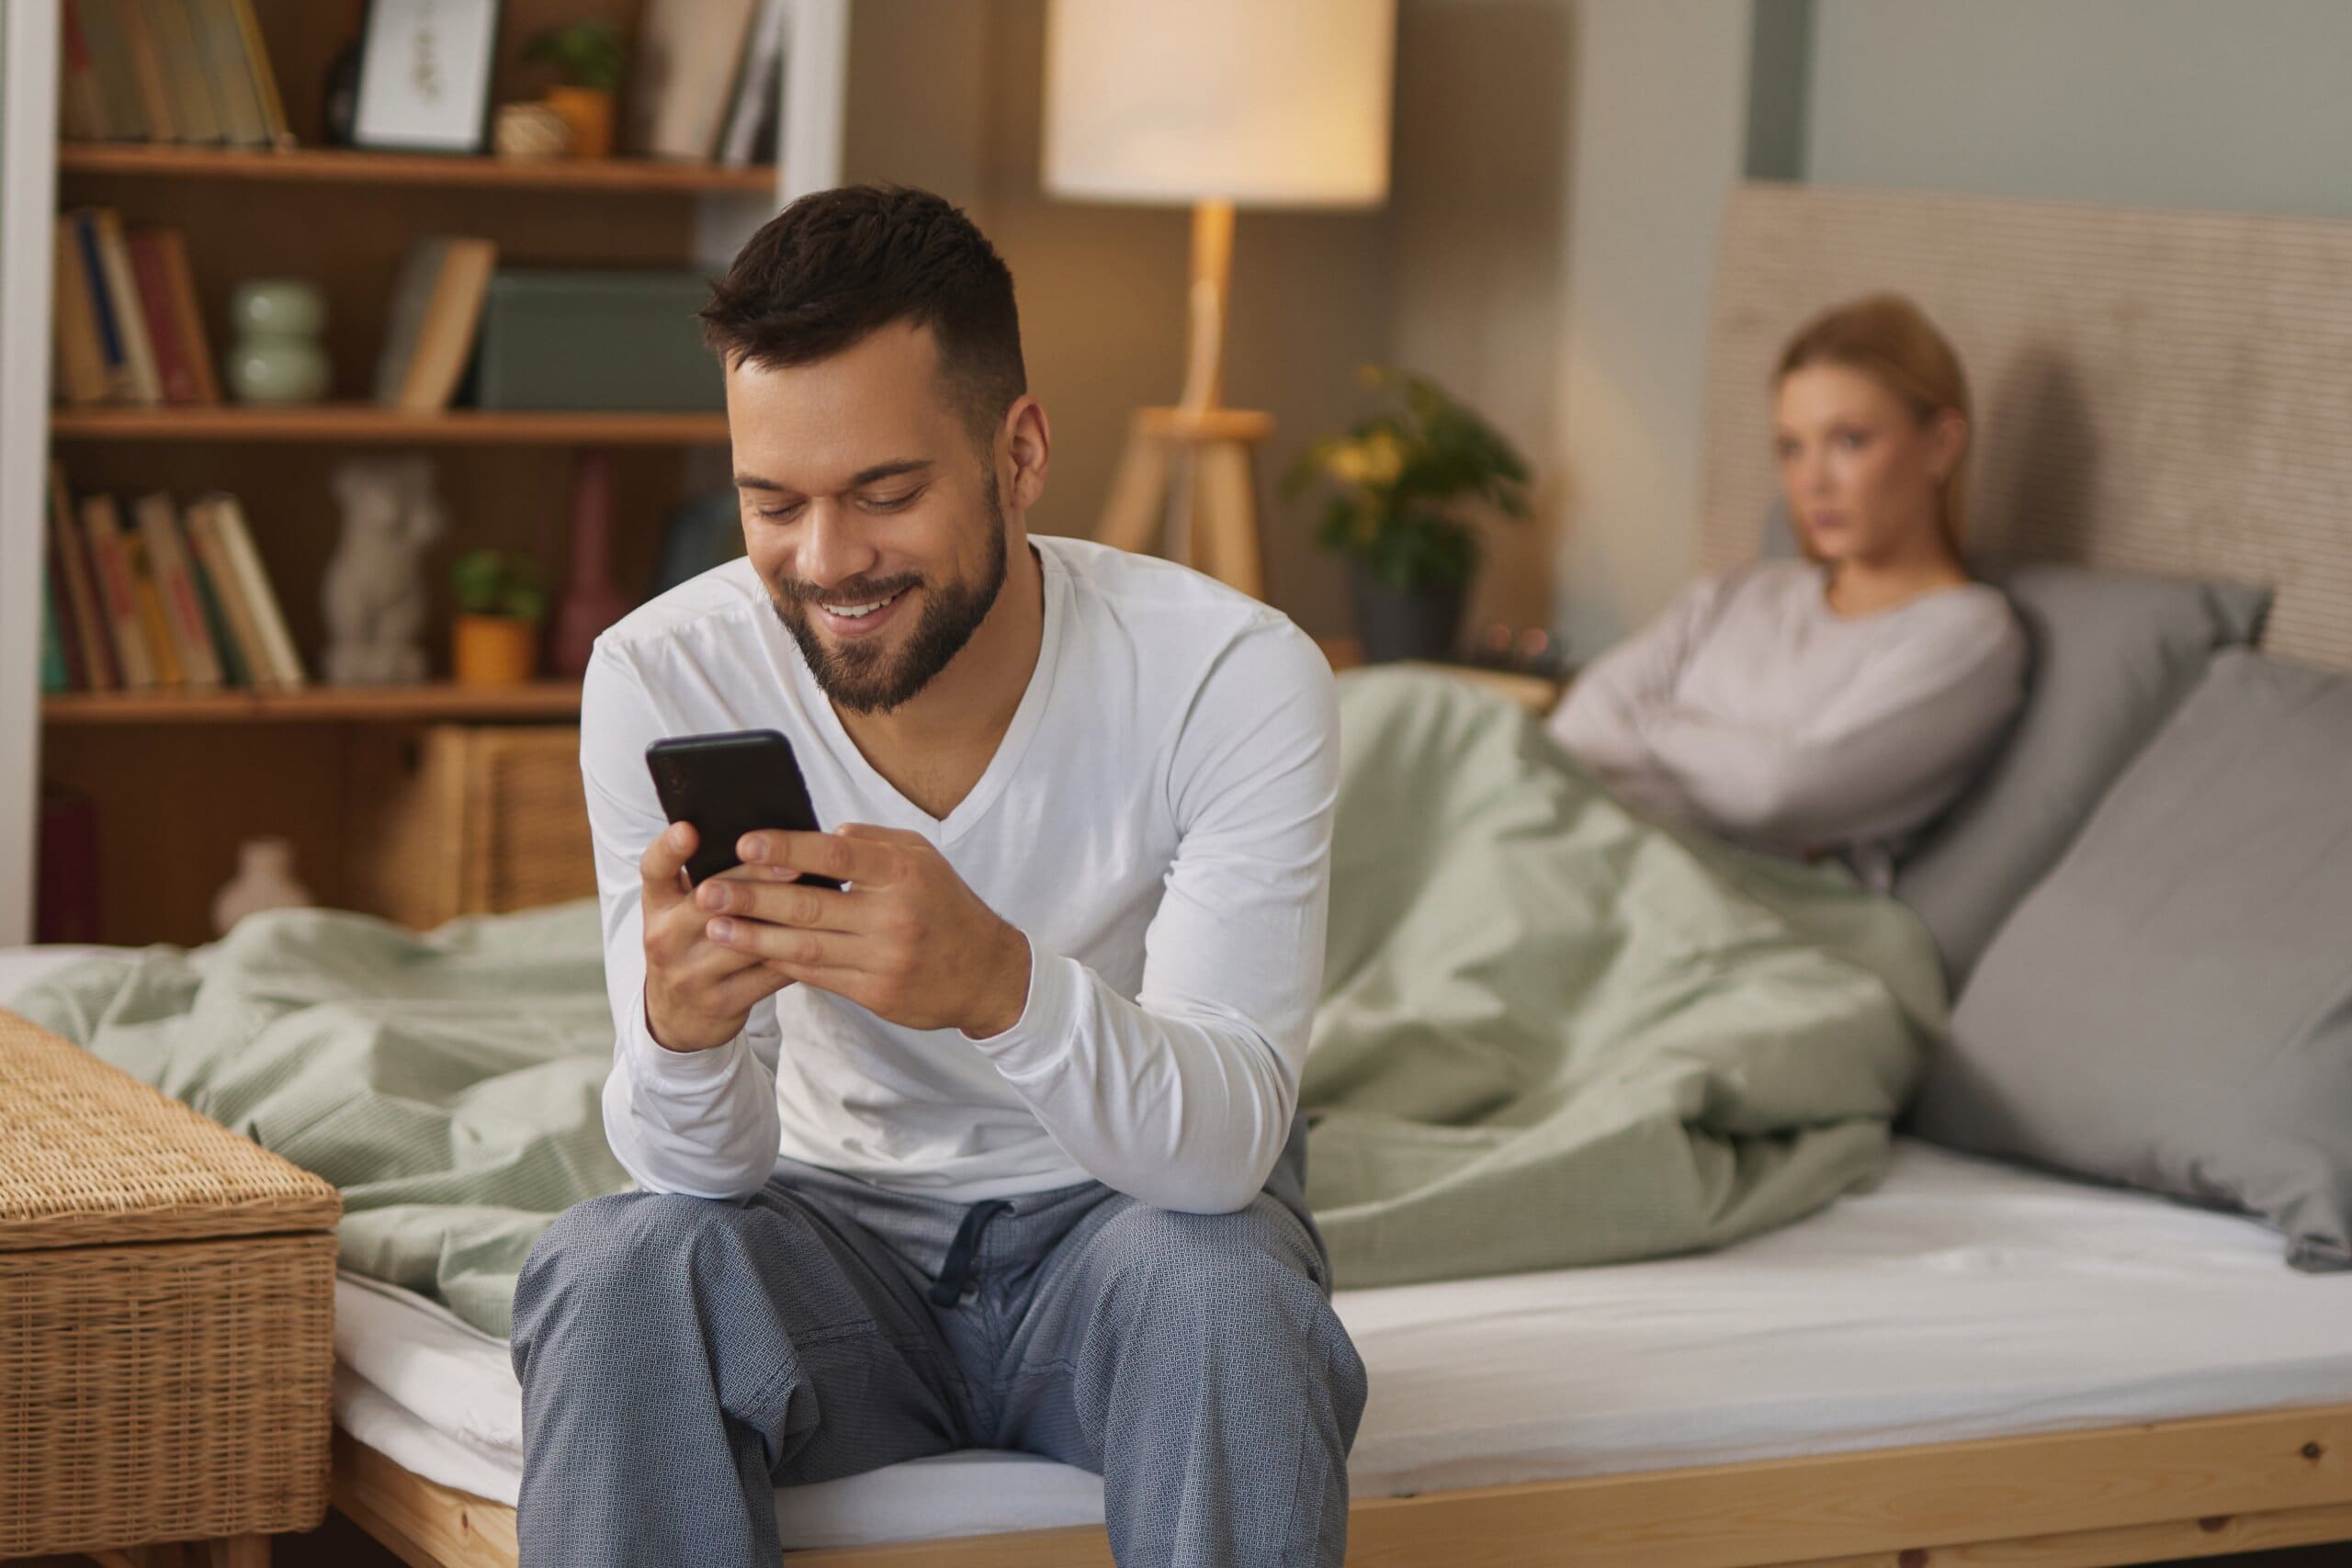 Man smiling at his phone sat on the end of the bed while woman looks upset laying in bed.